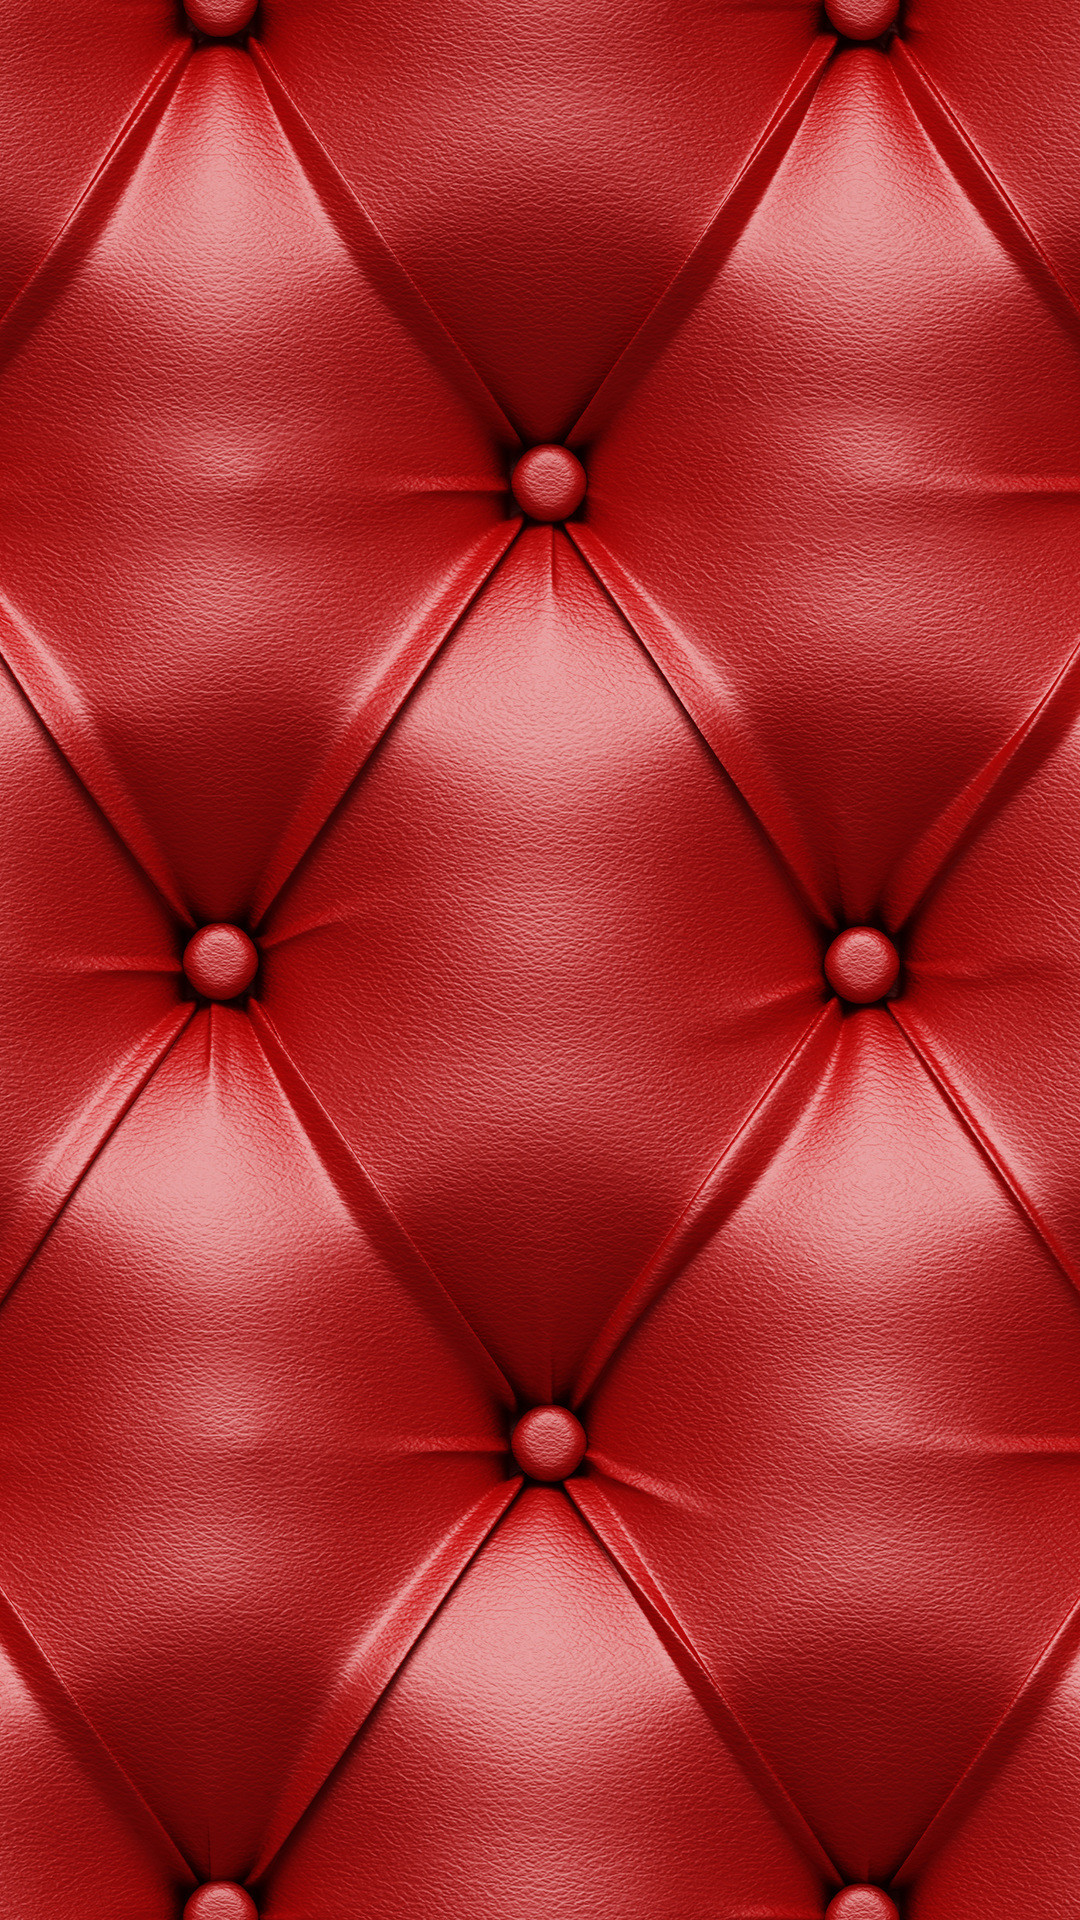 Texture, luxury, red, leather, background, upholstery, leather photo